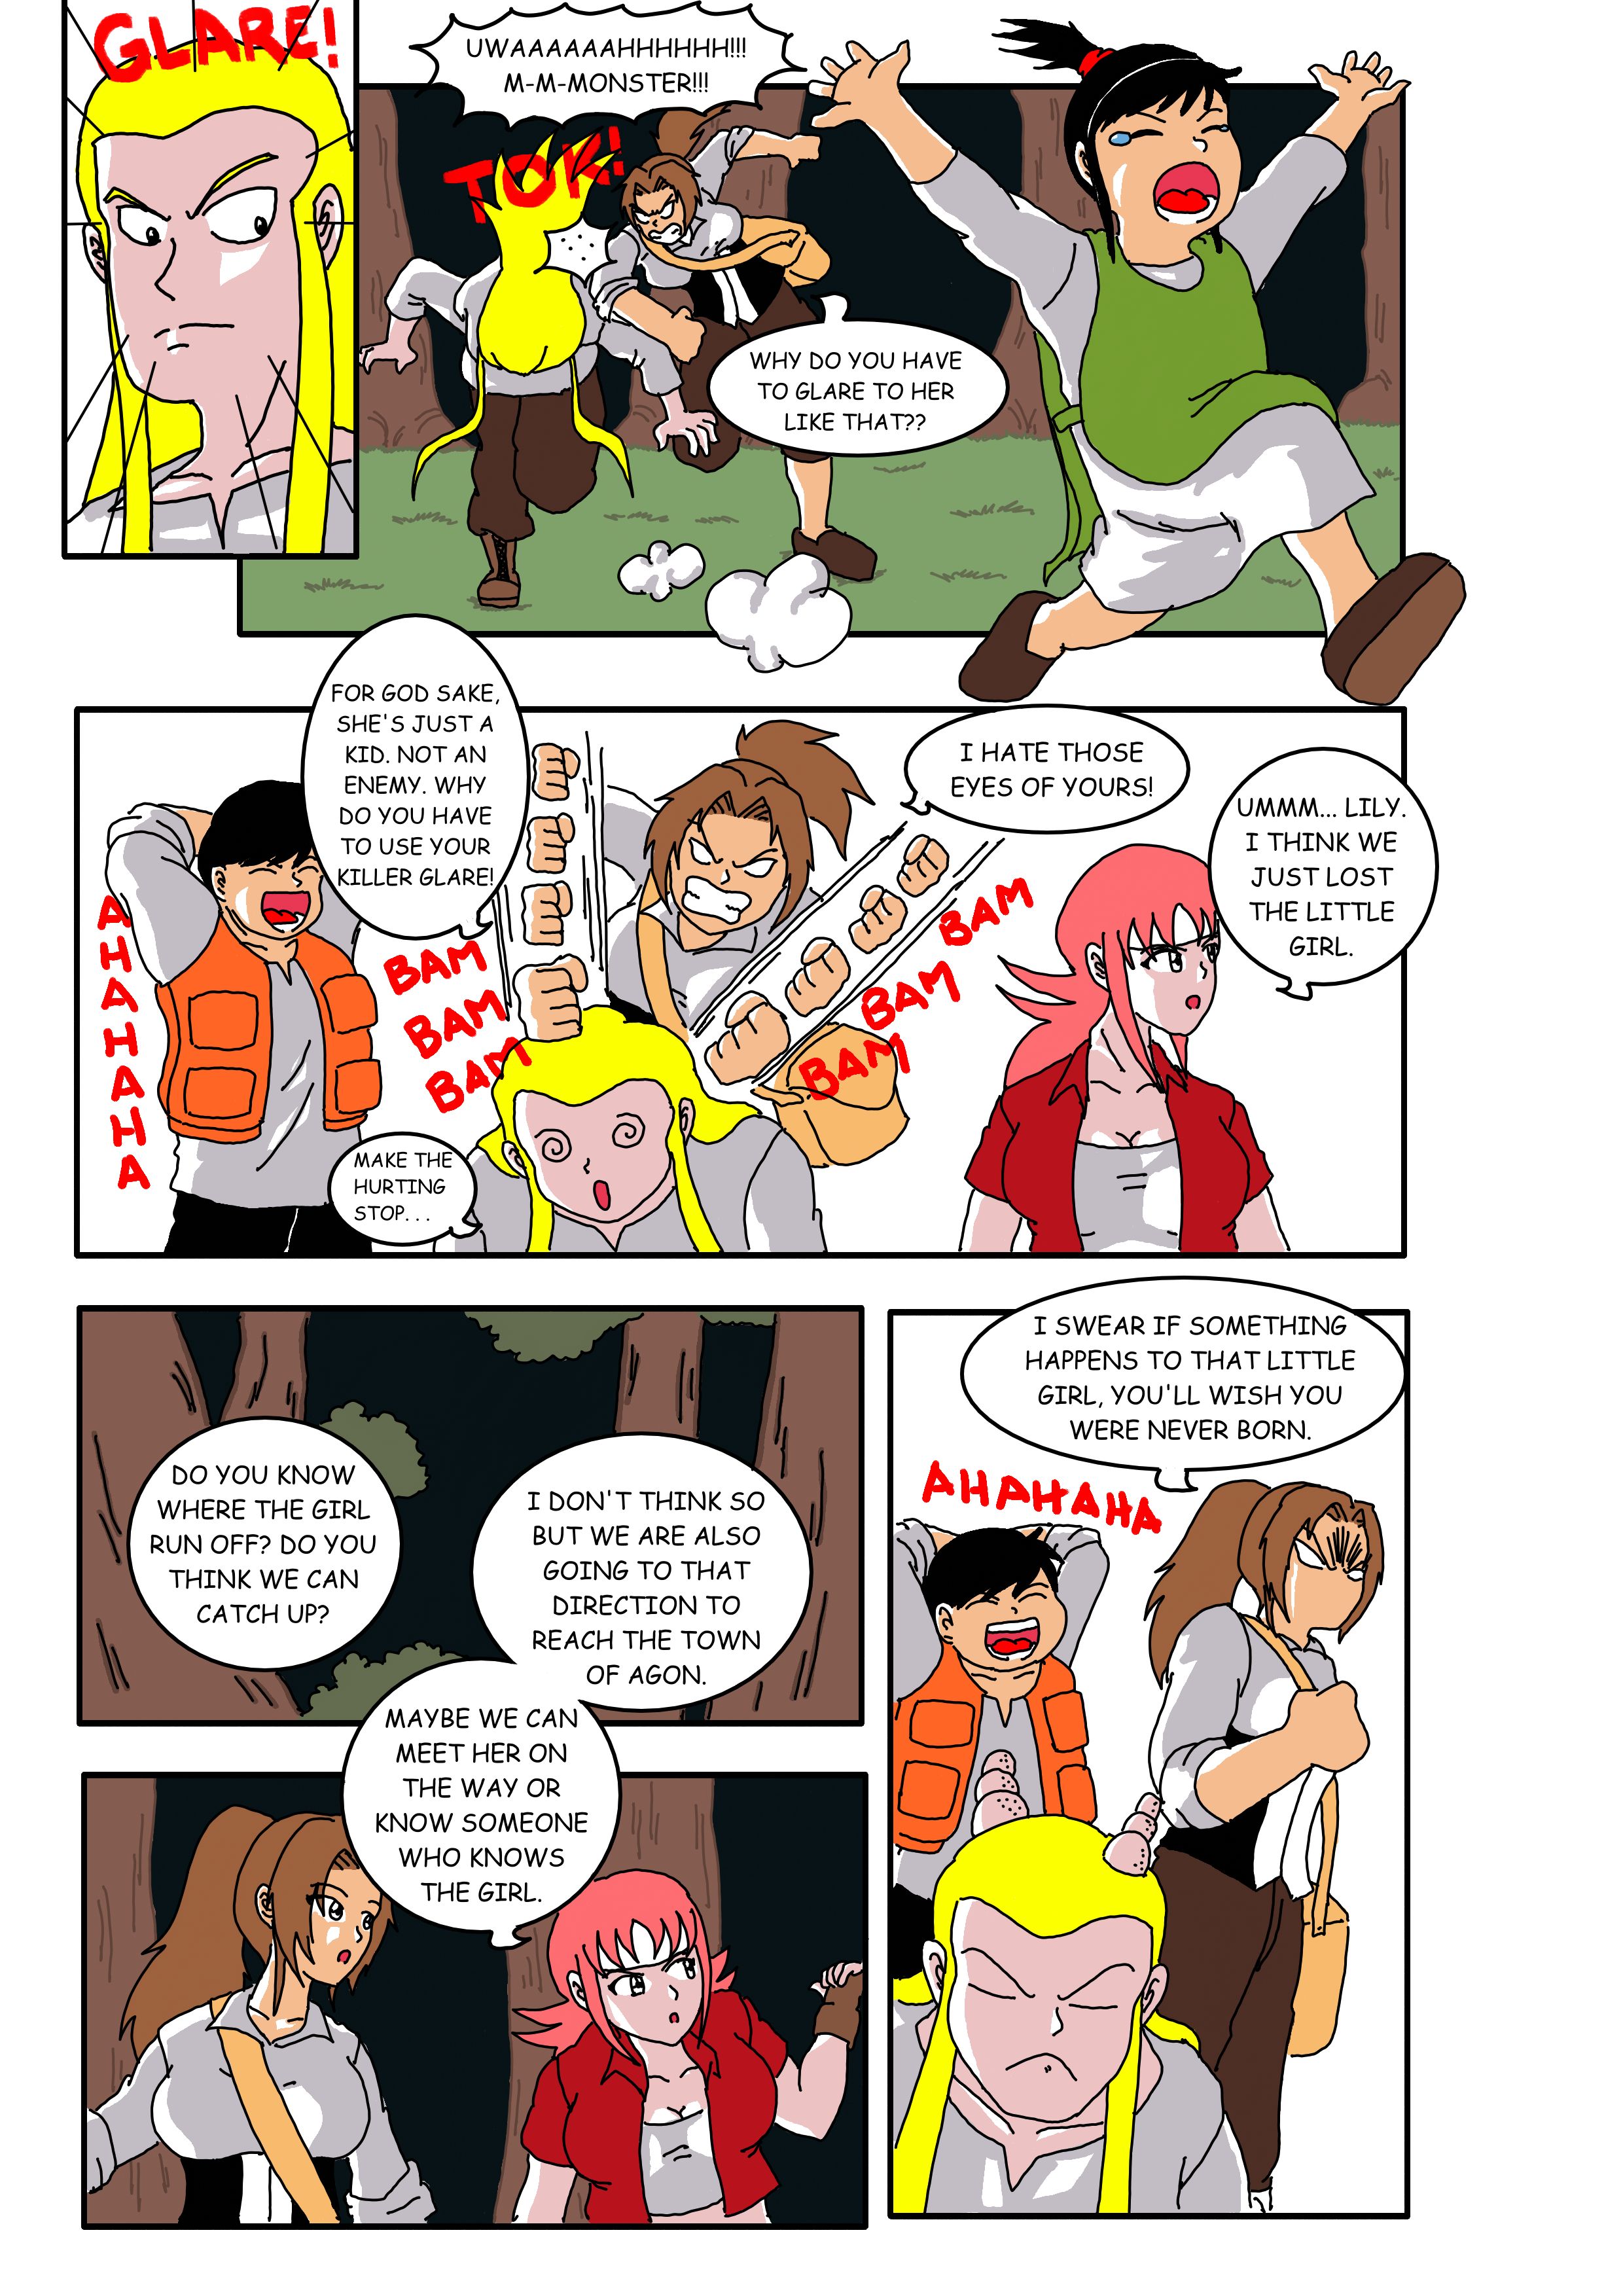 Odyssey - Page 2